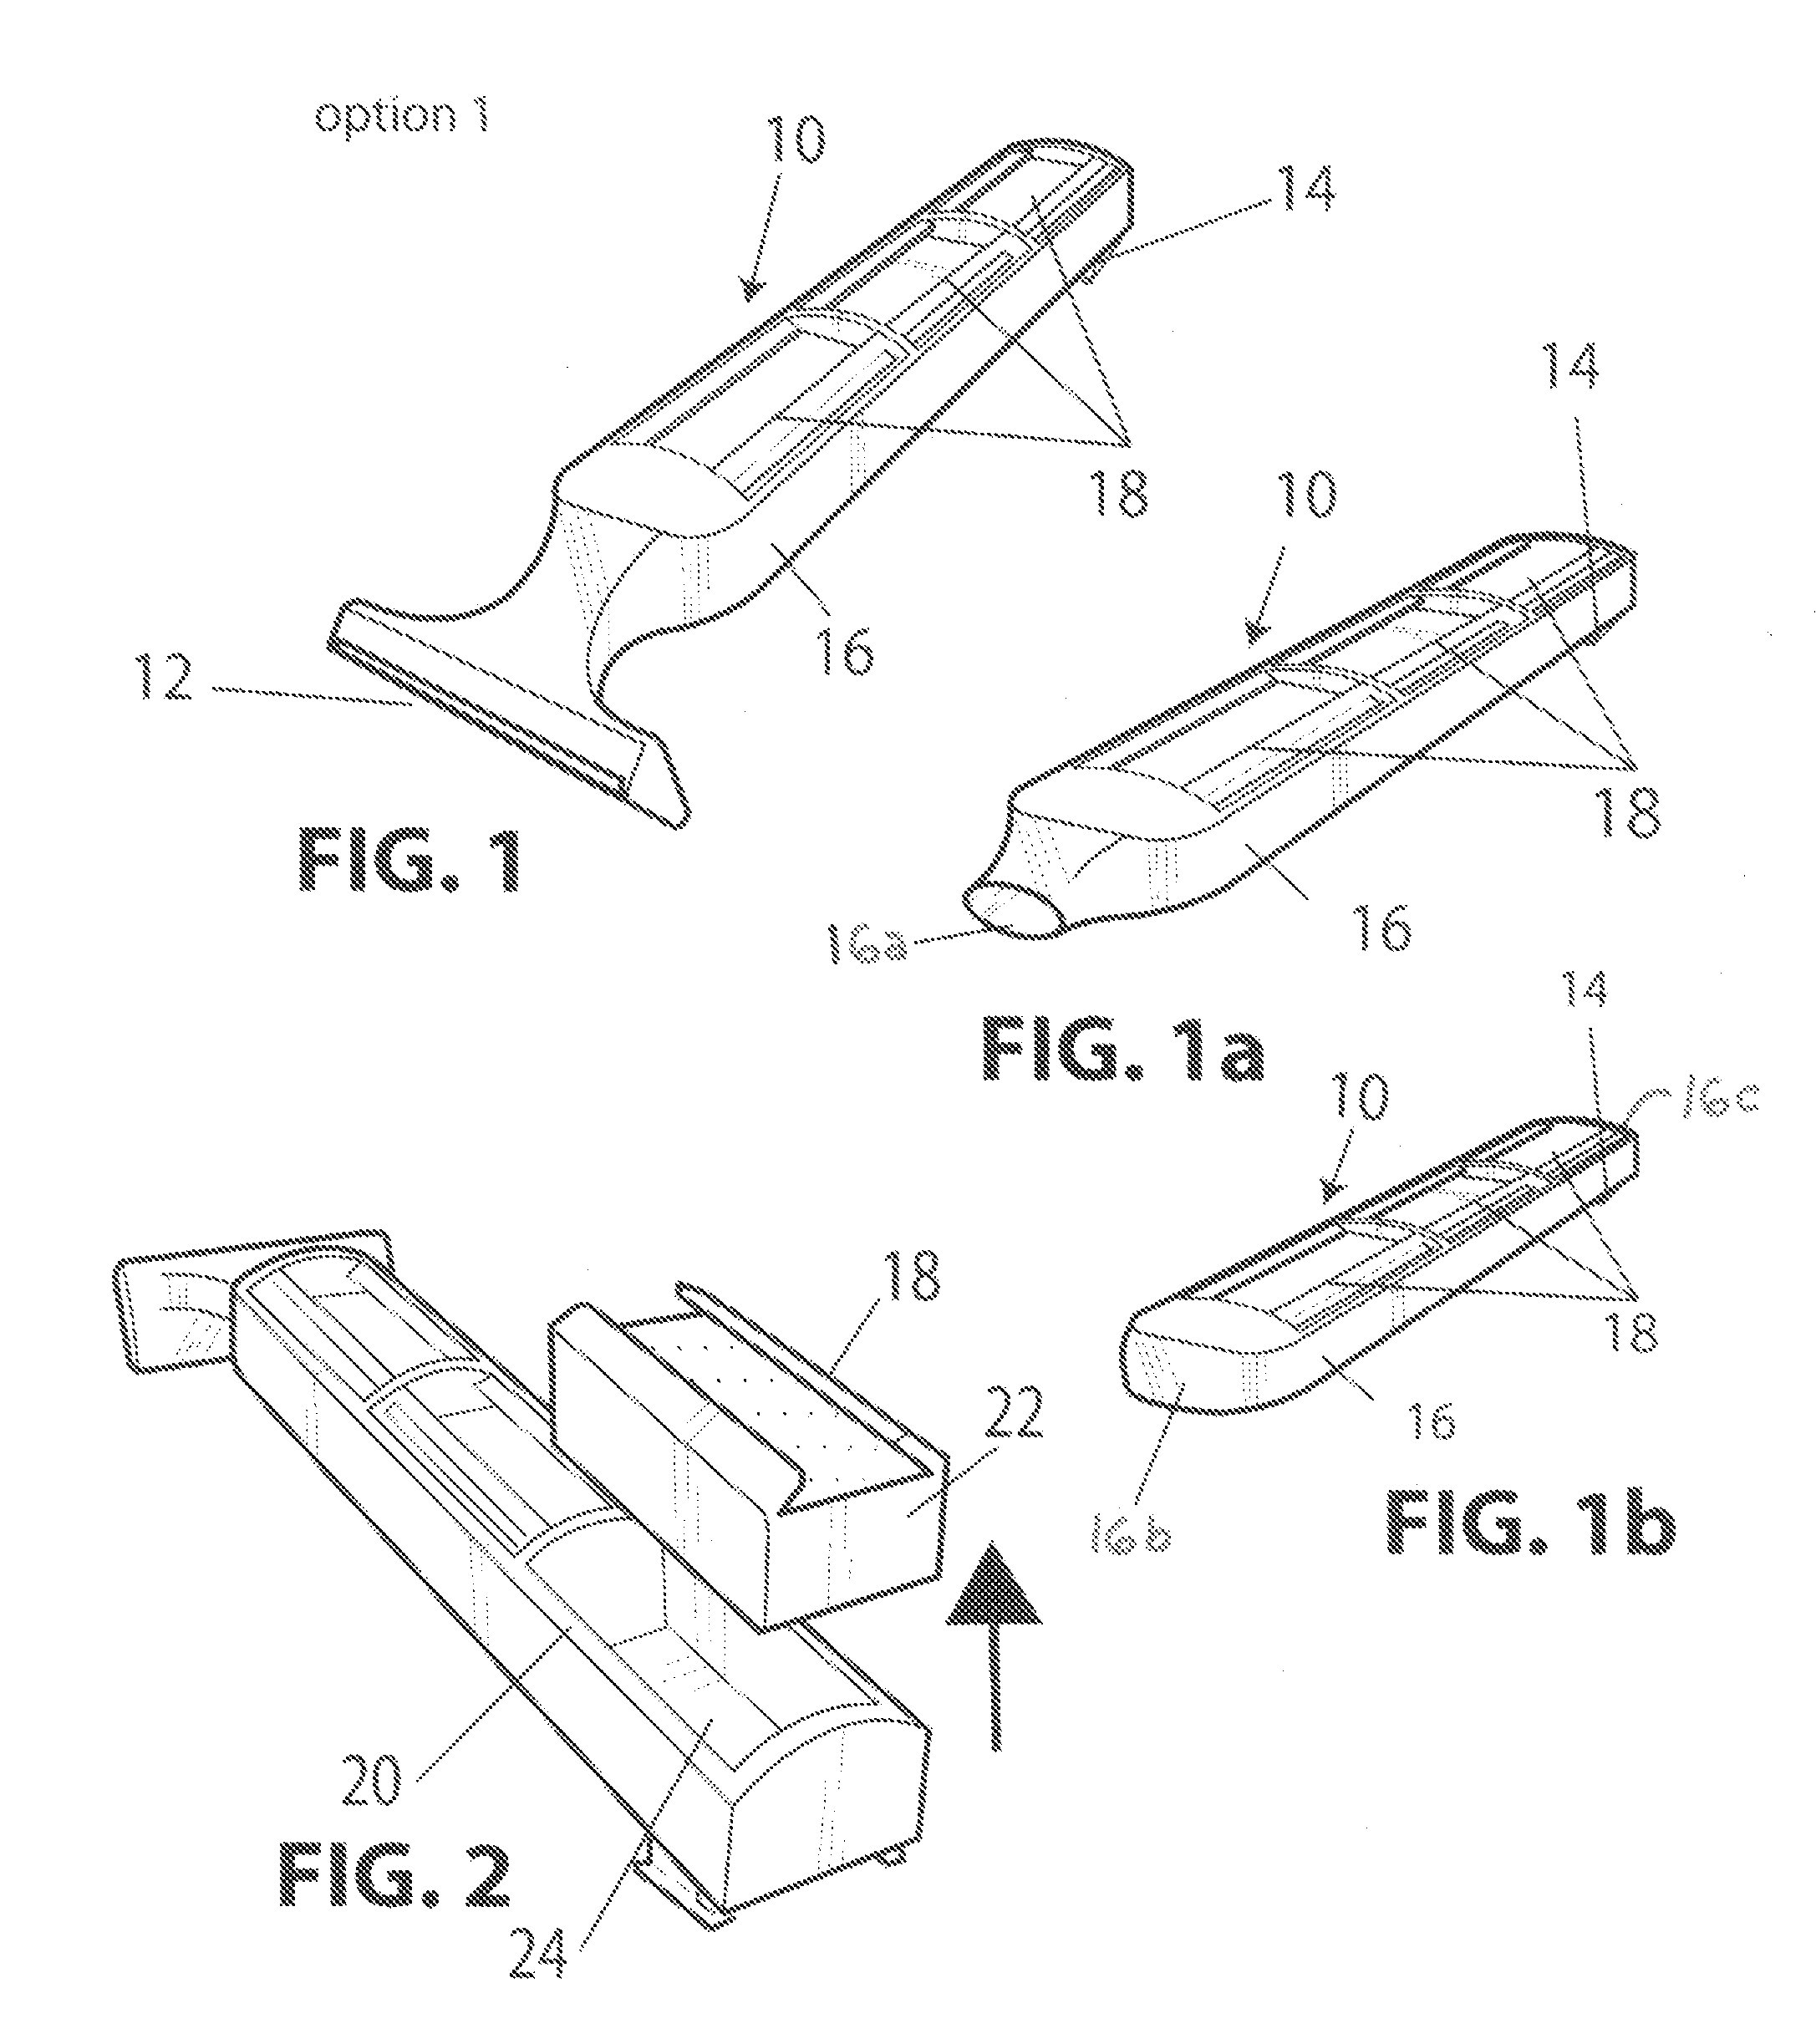 Shaving device with razor and applicator heads